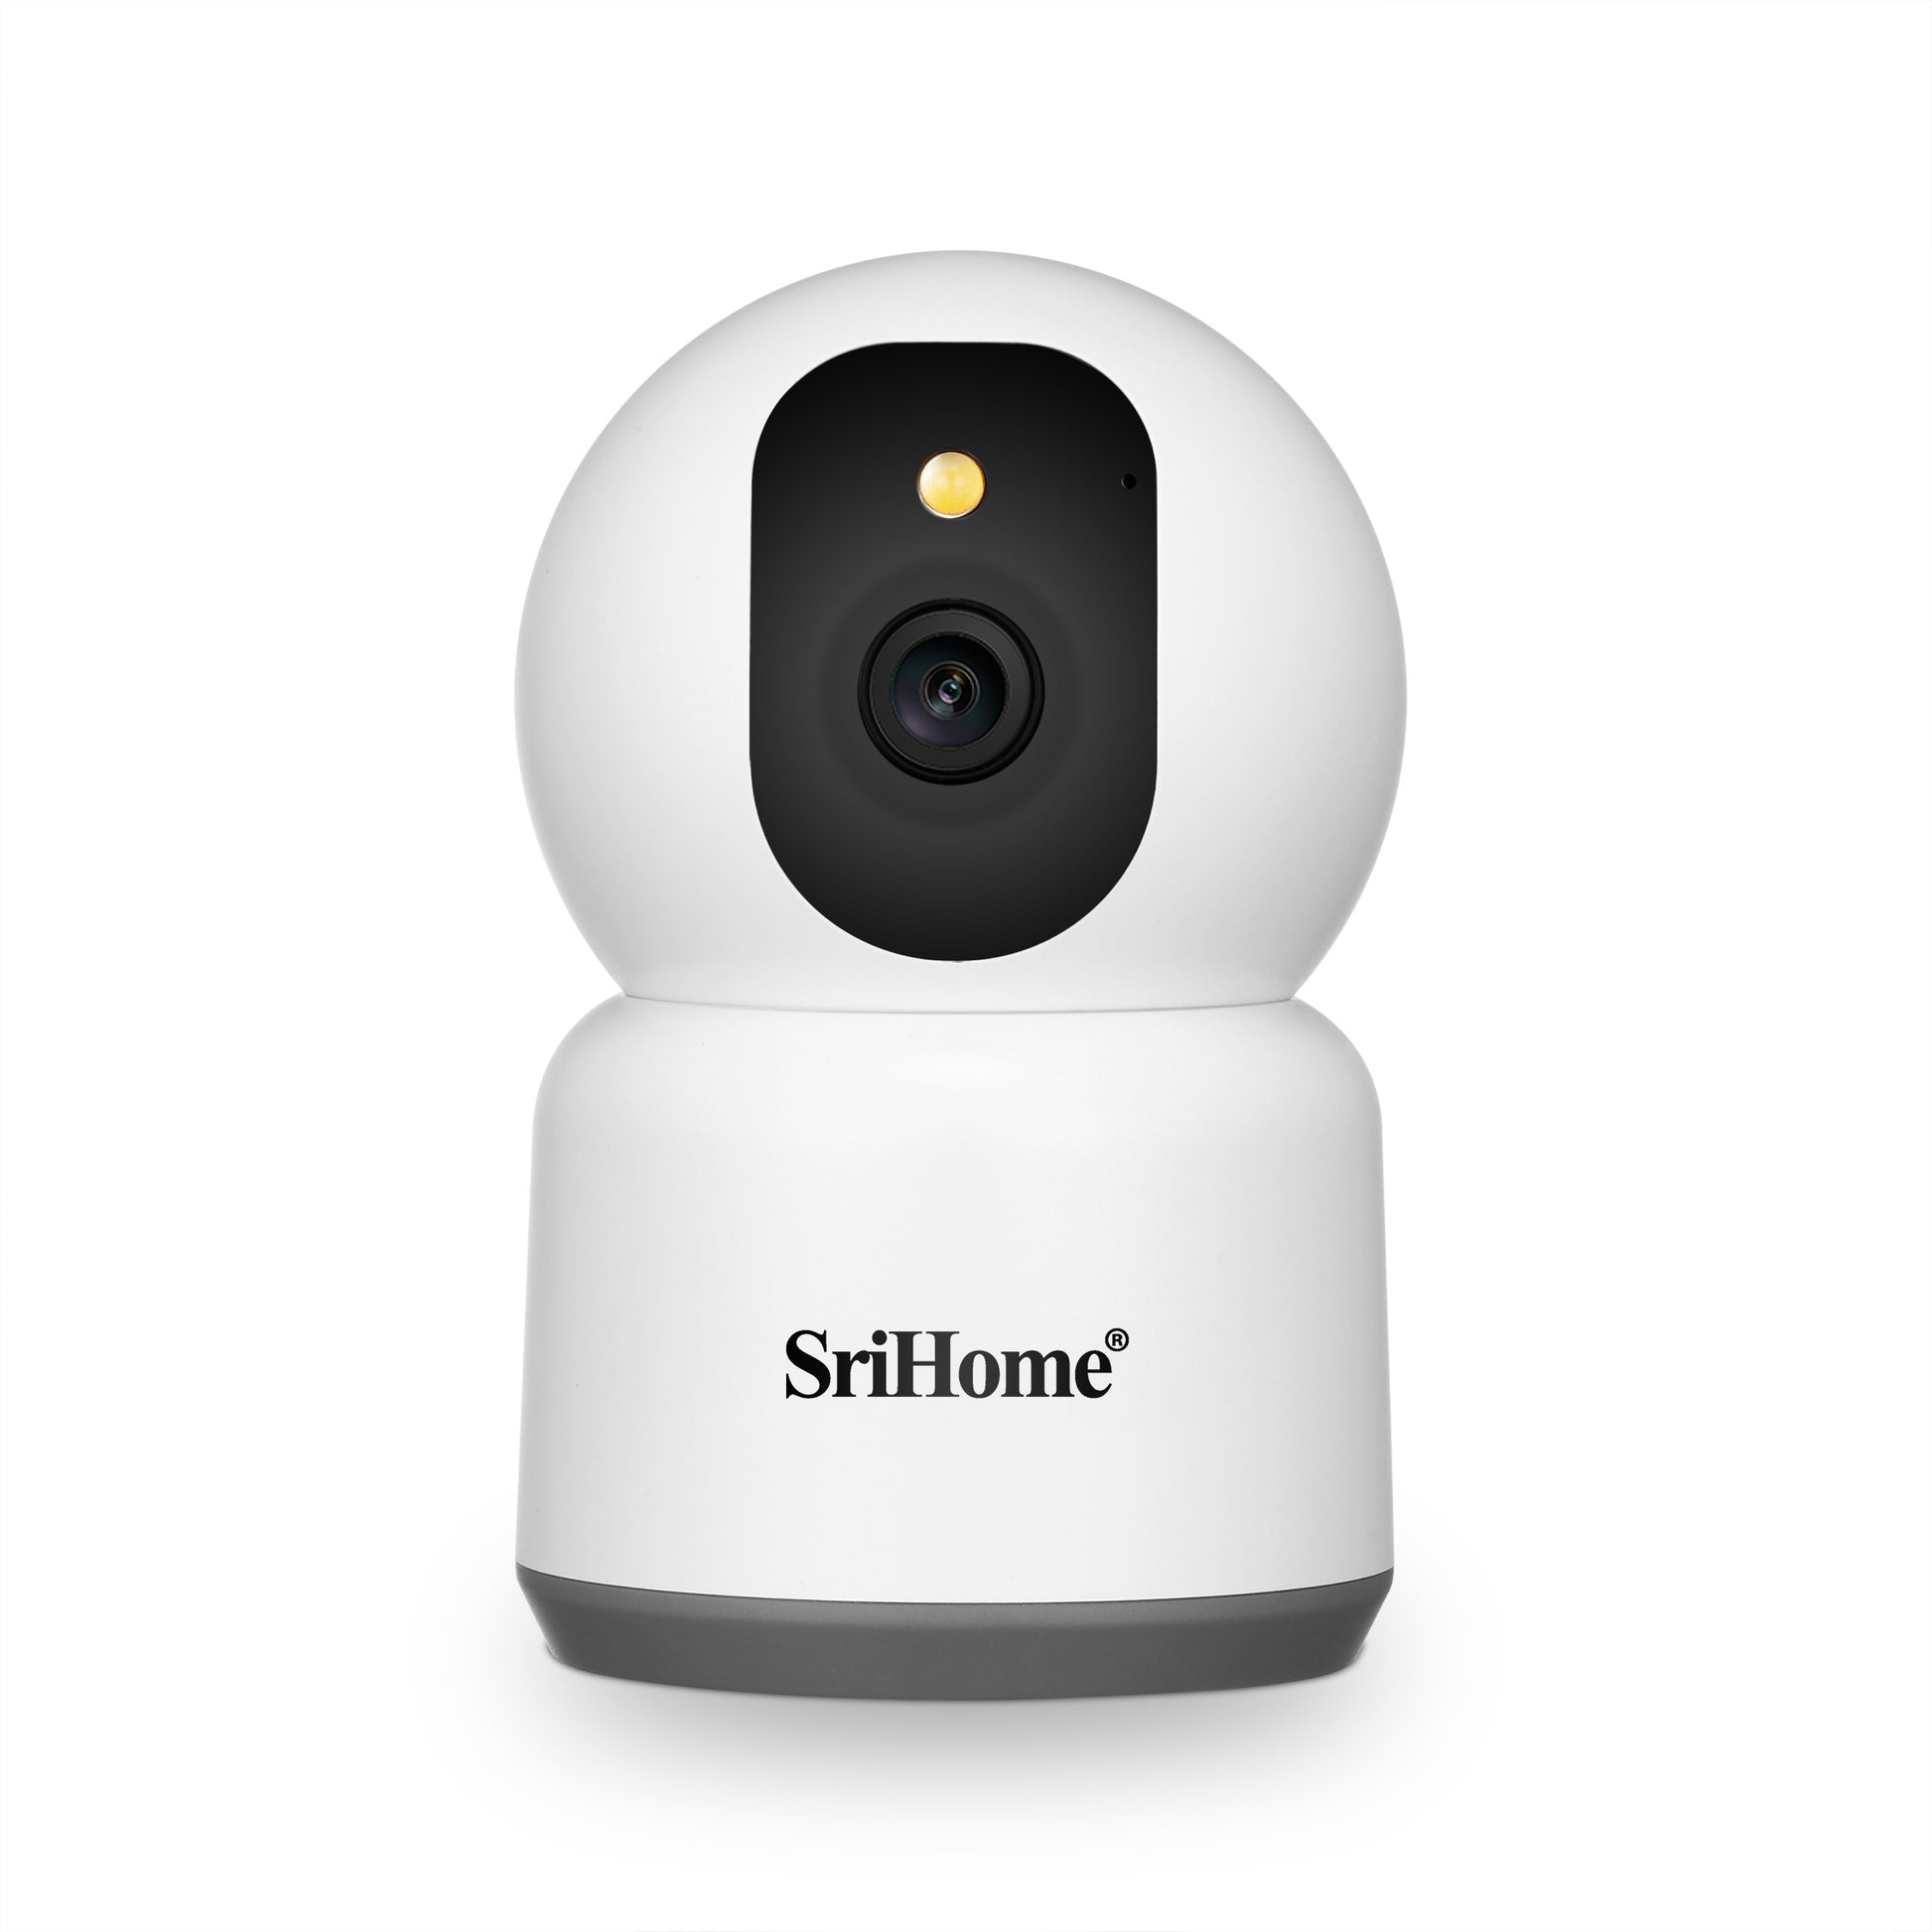 WINTORY SH038 WiFi IP camera with 2.4G/5G WiFi, real-time motion detection alerts Wintory